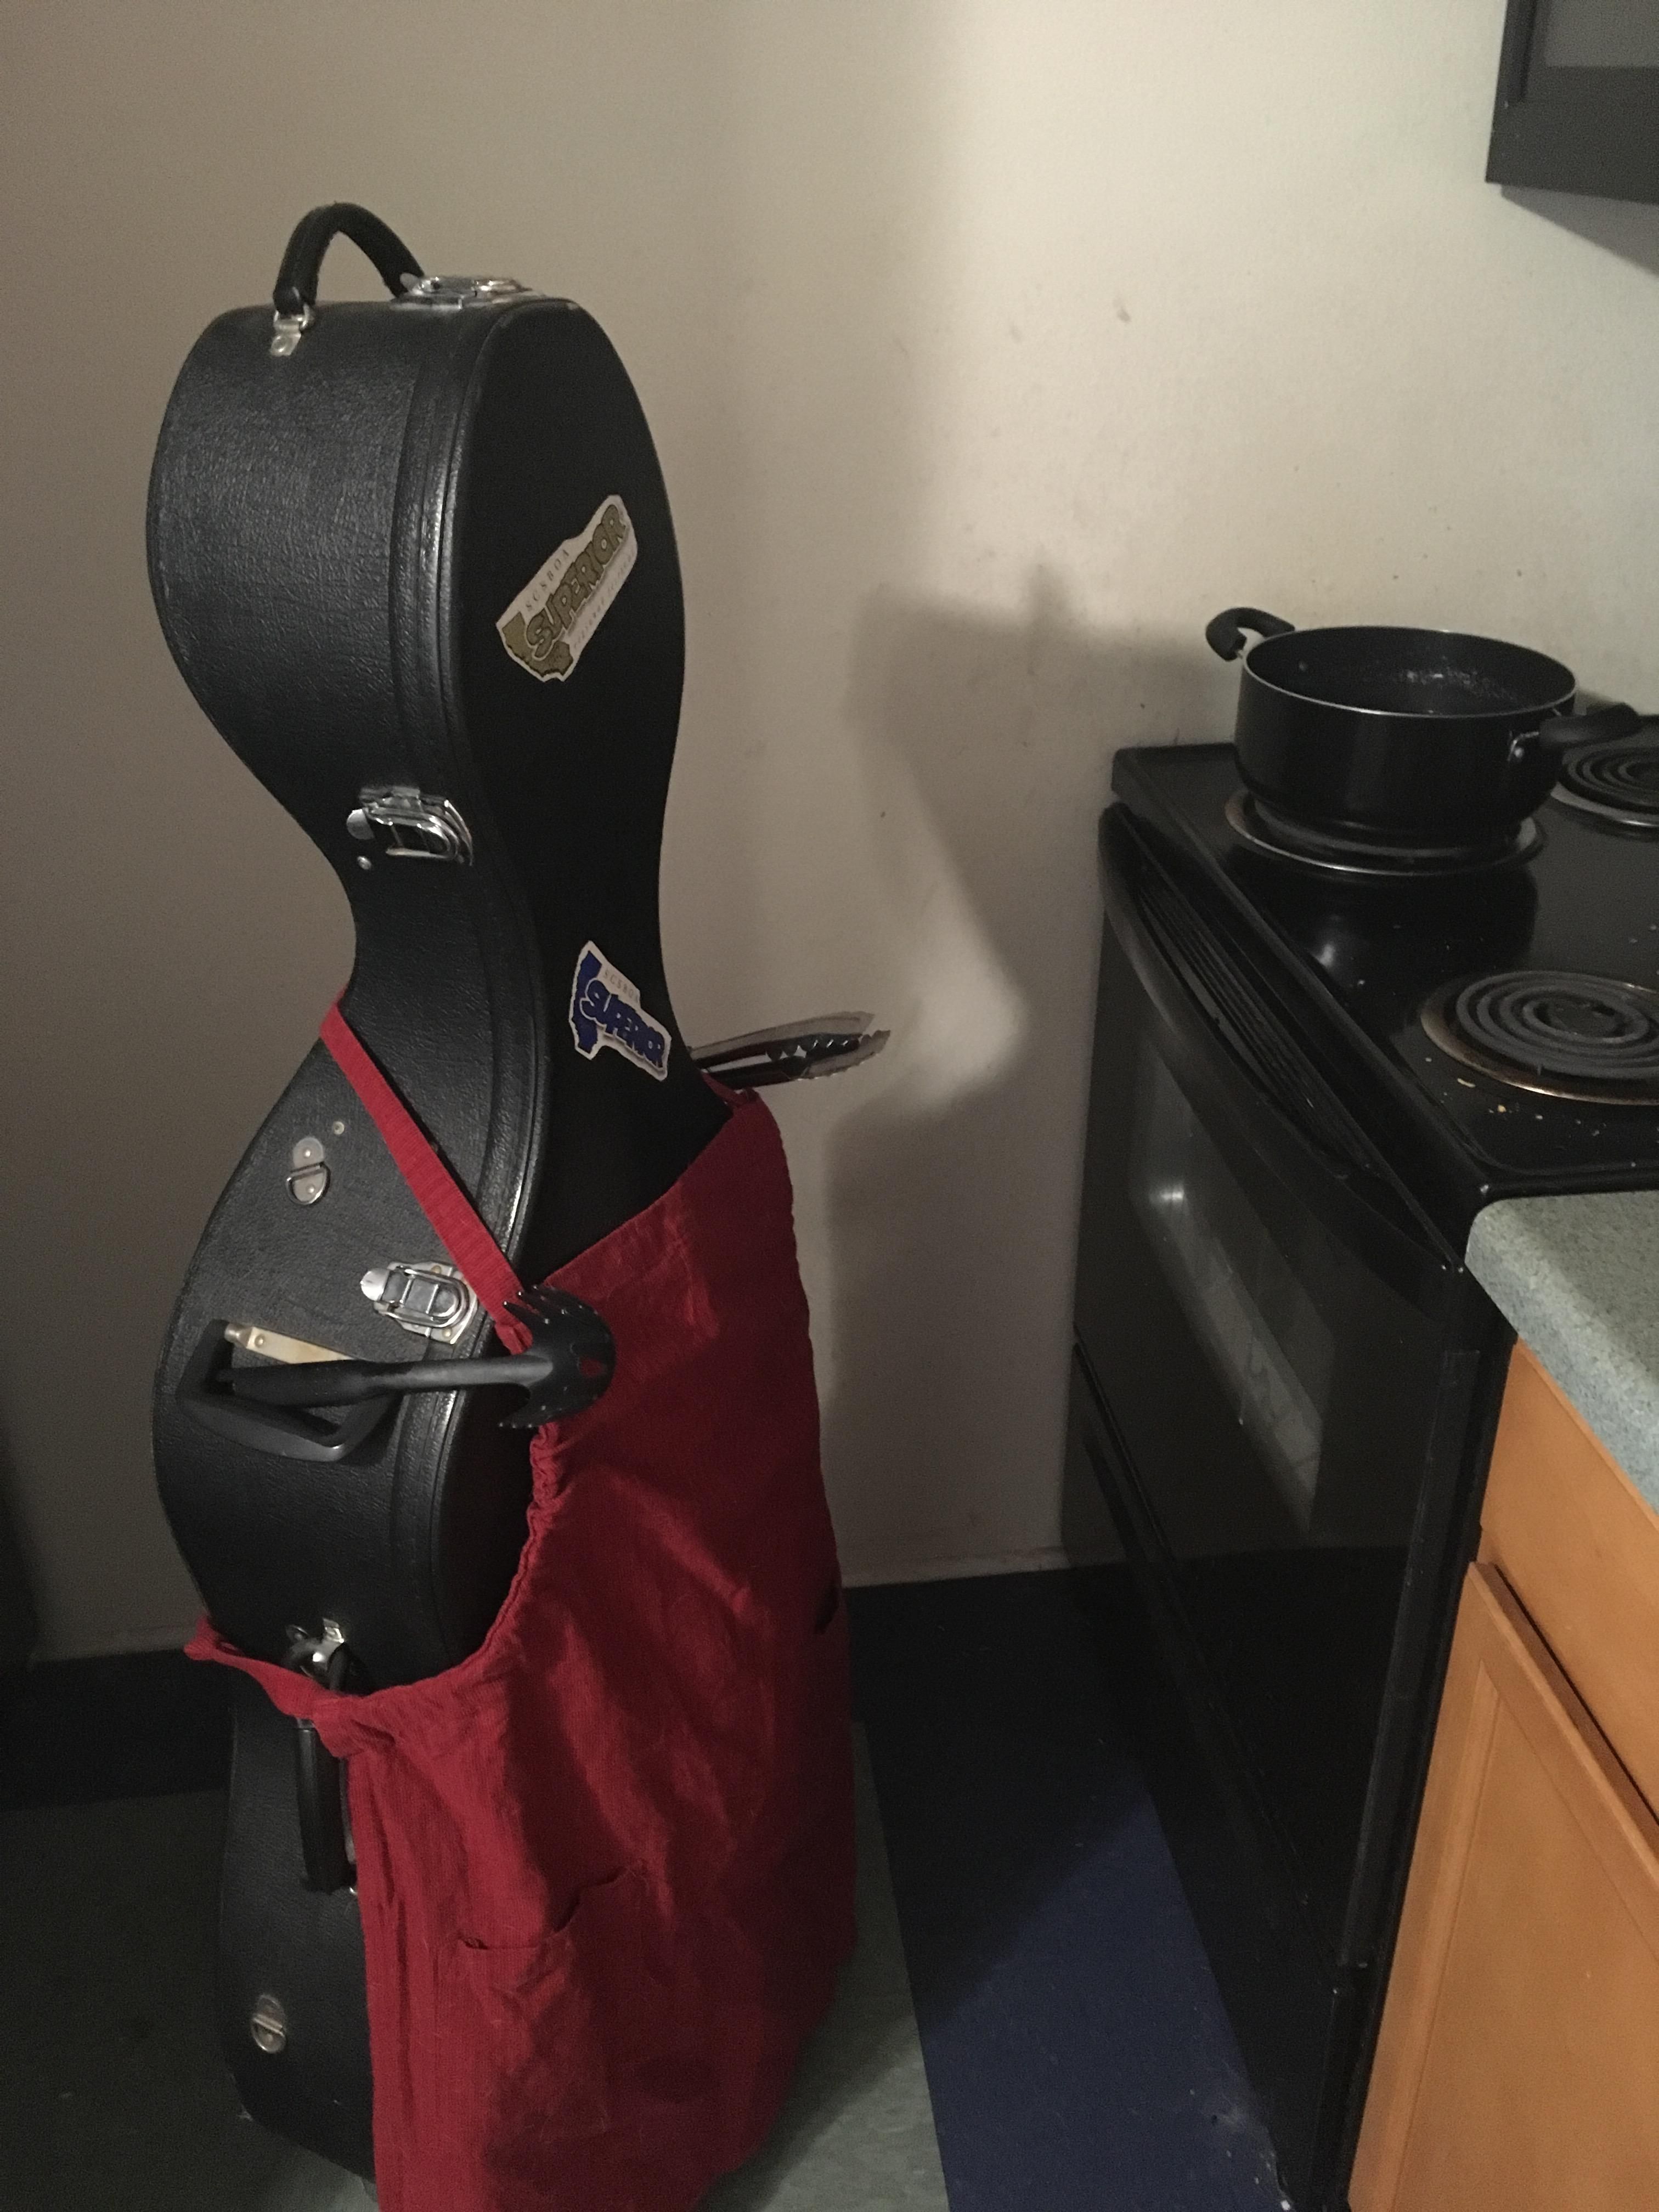 My friend is storing his cello at my place. I occasionally send him updates on how it’s going.